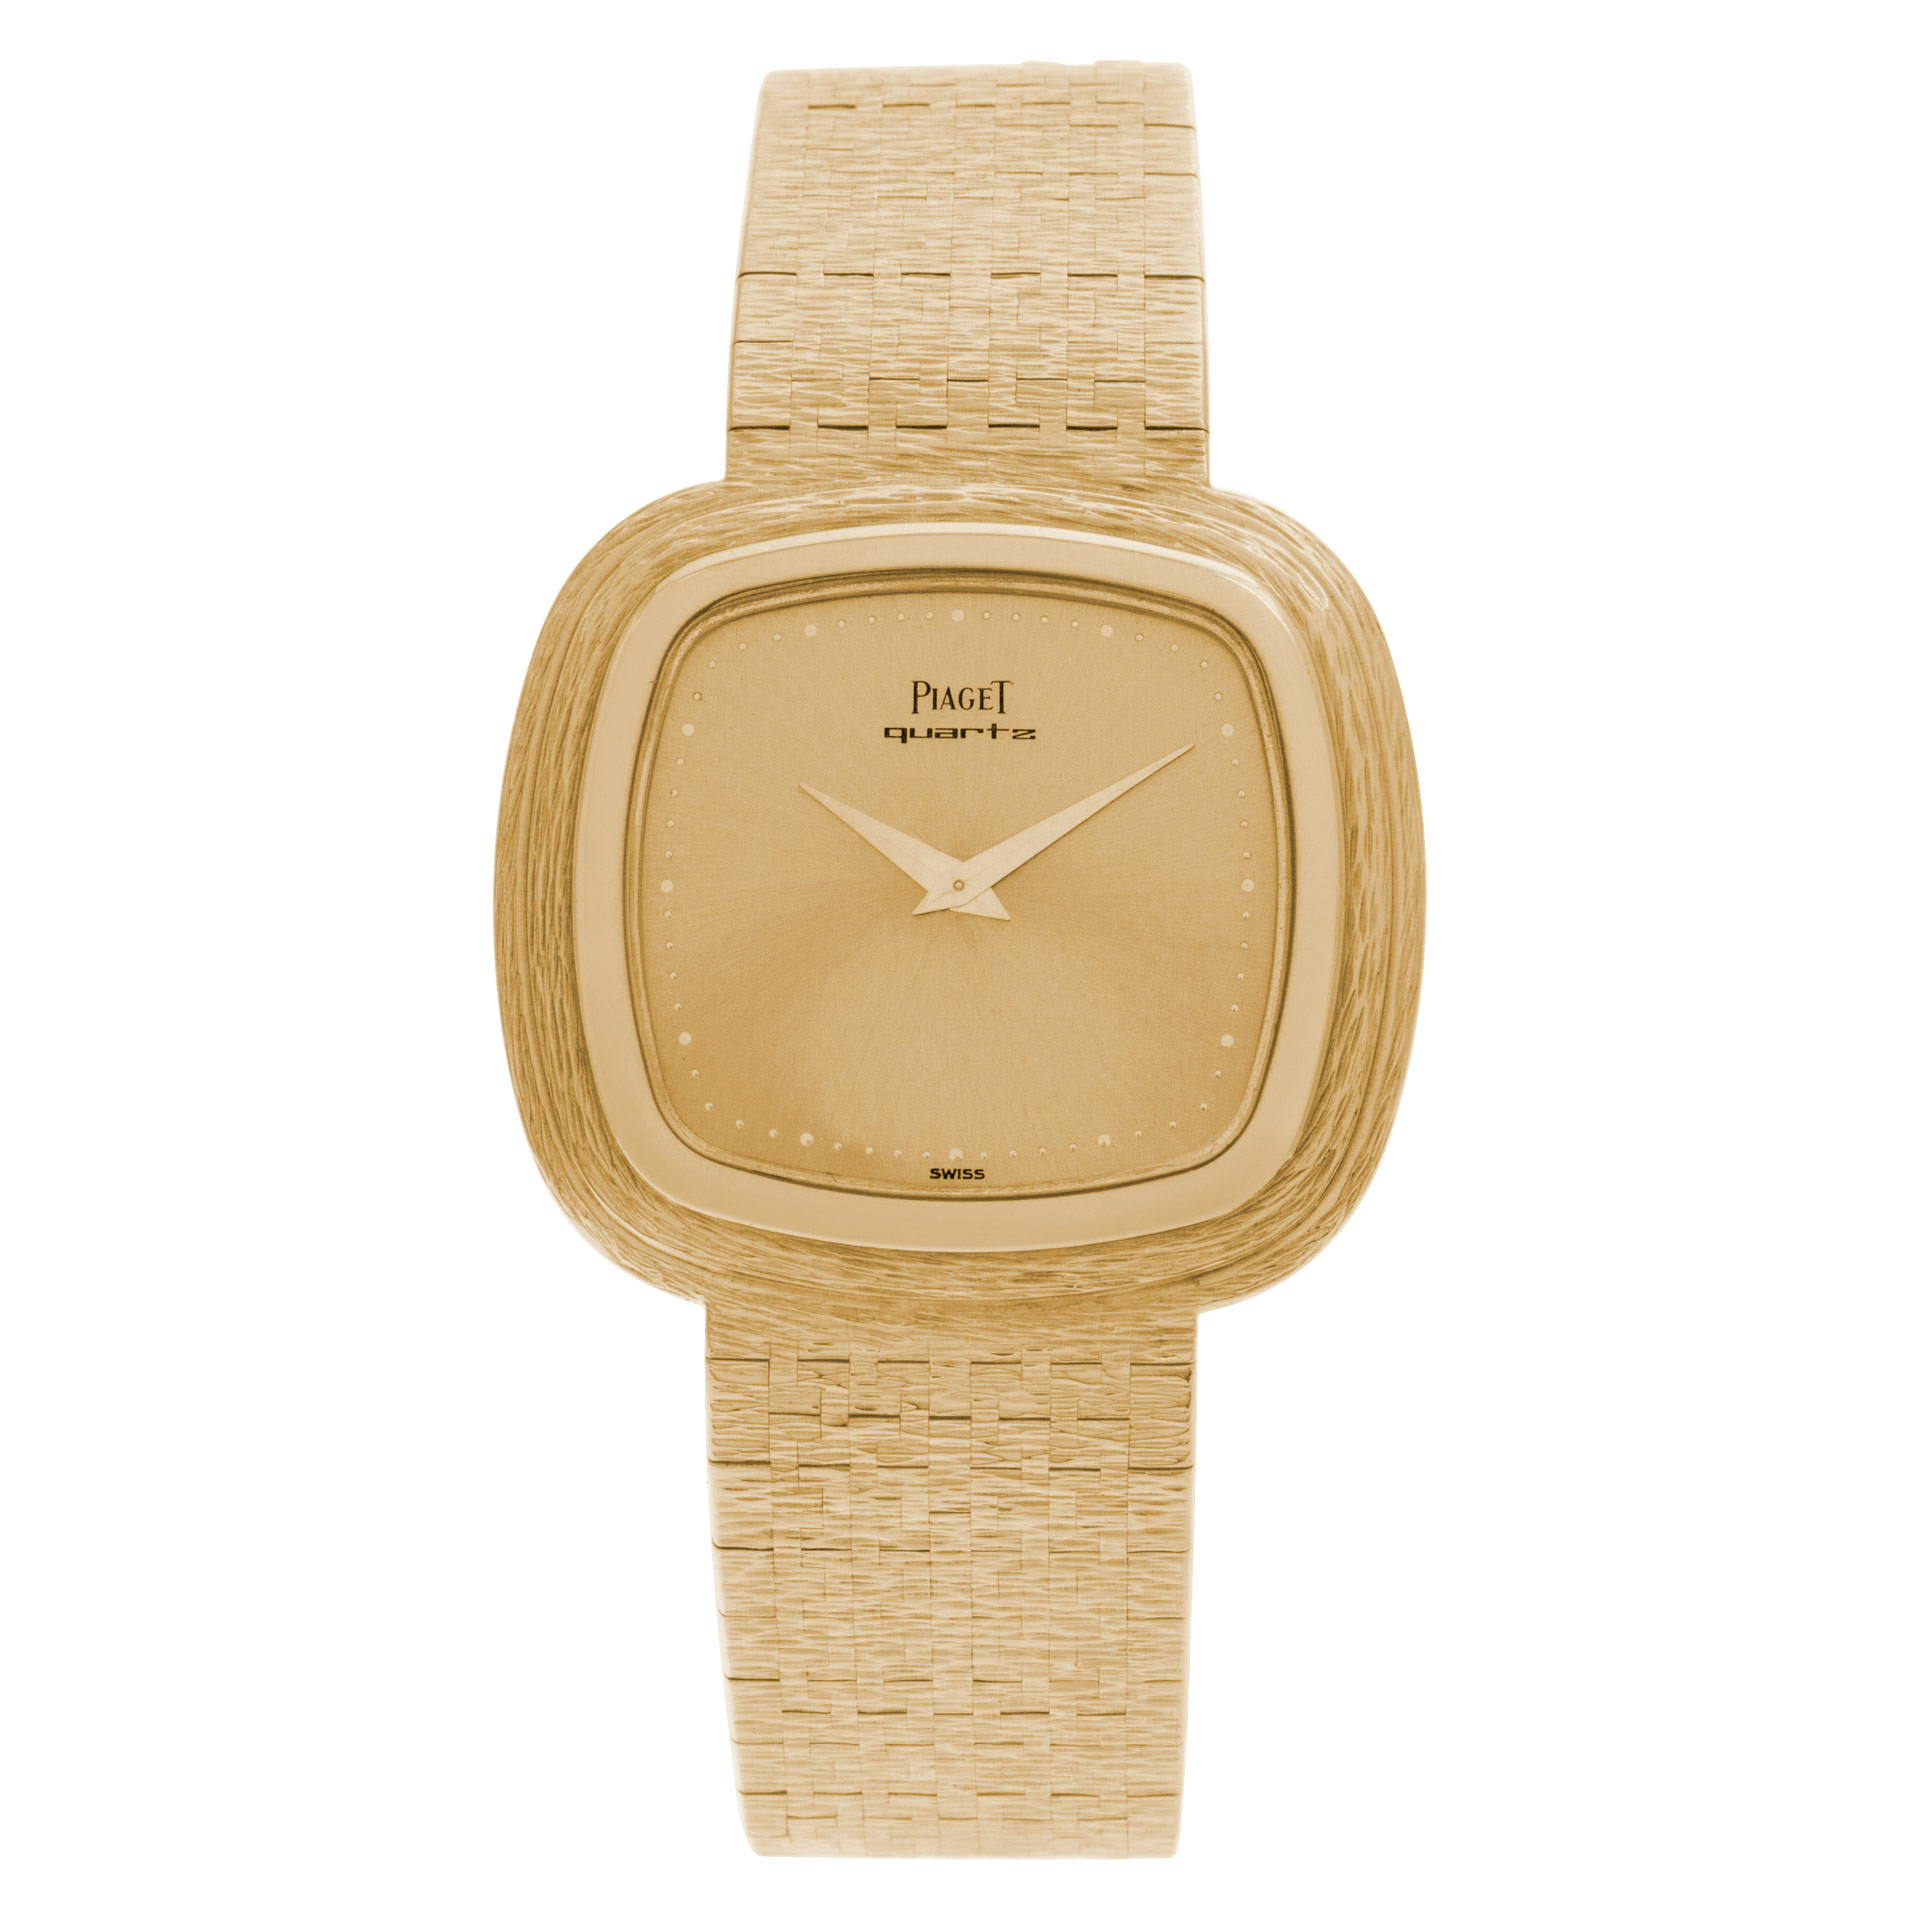 Piaget Classic 34mm 75121a6 image 1